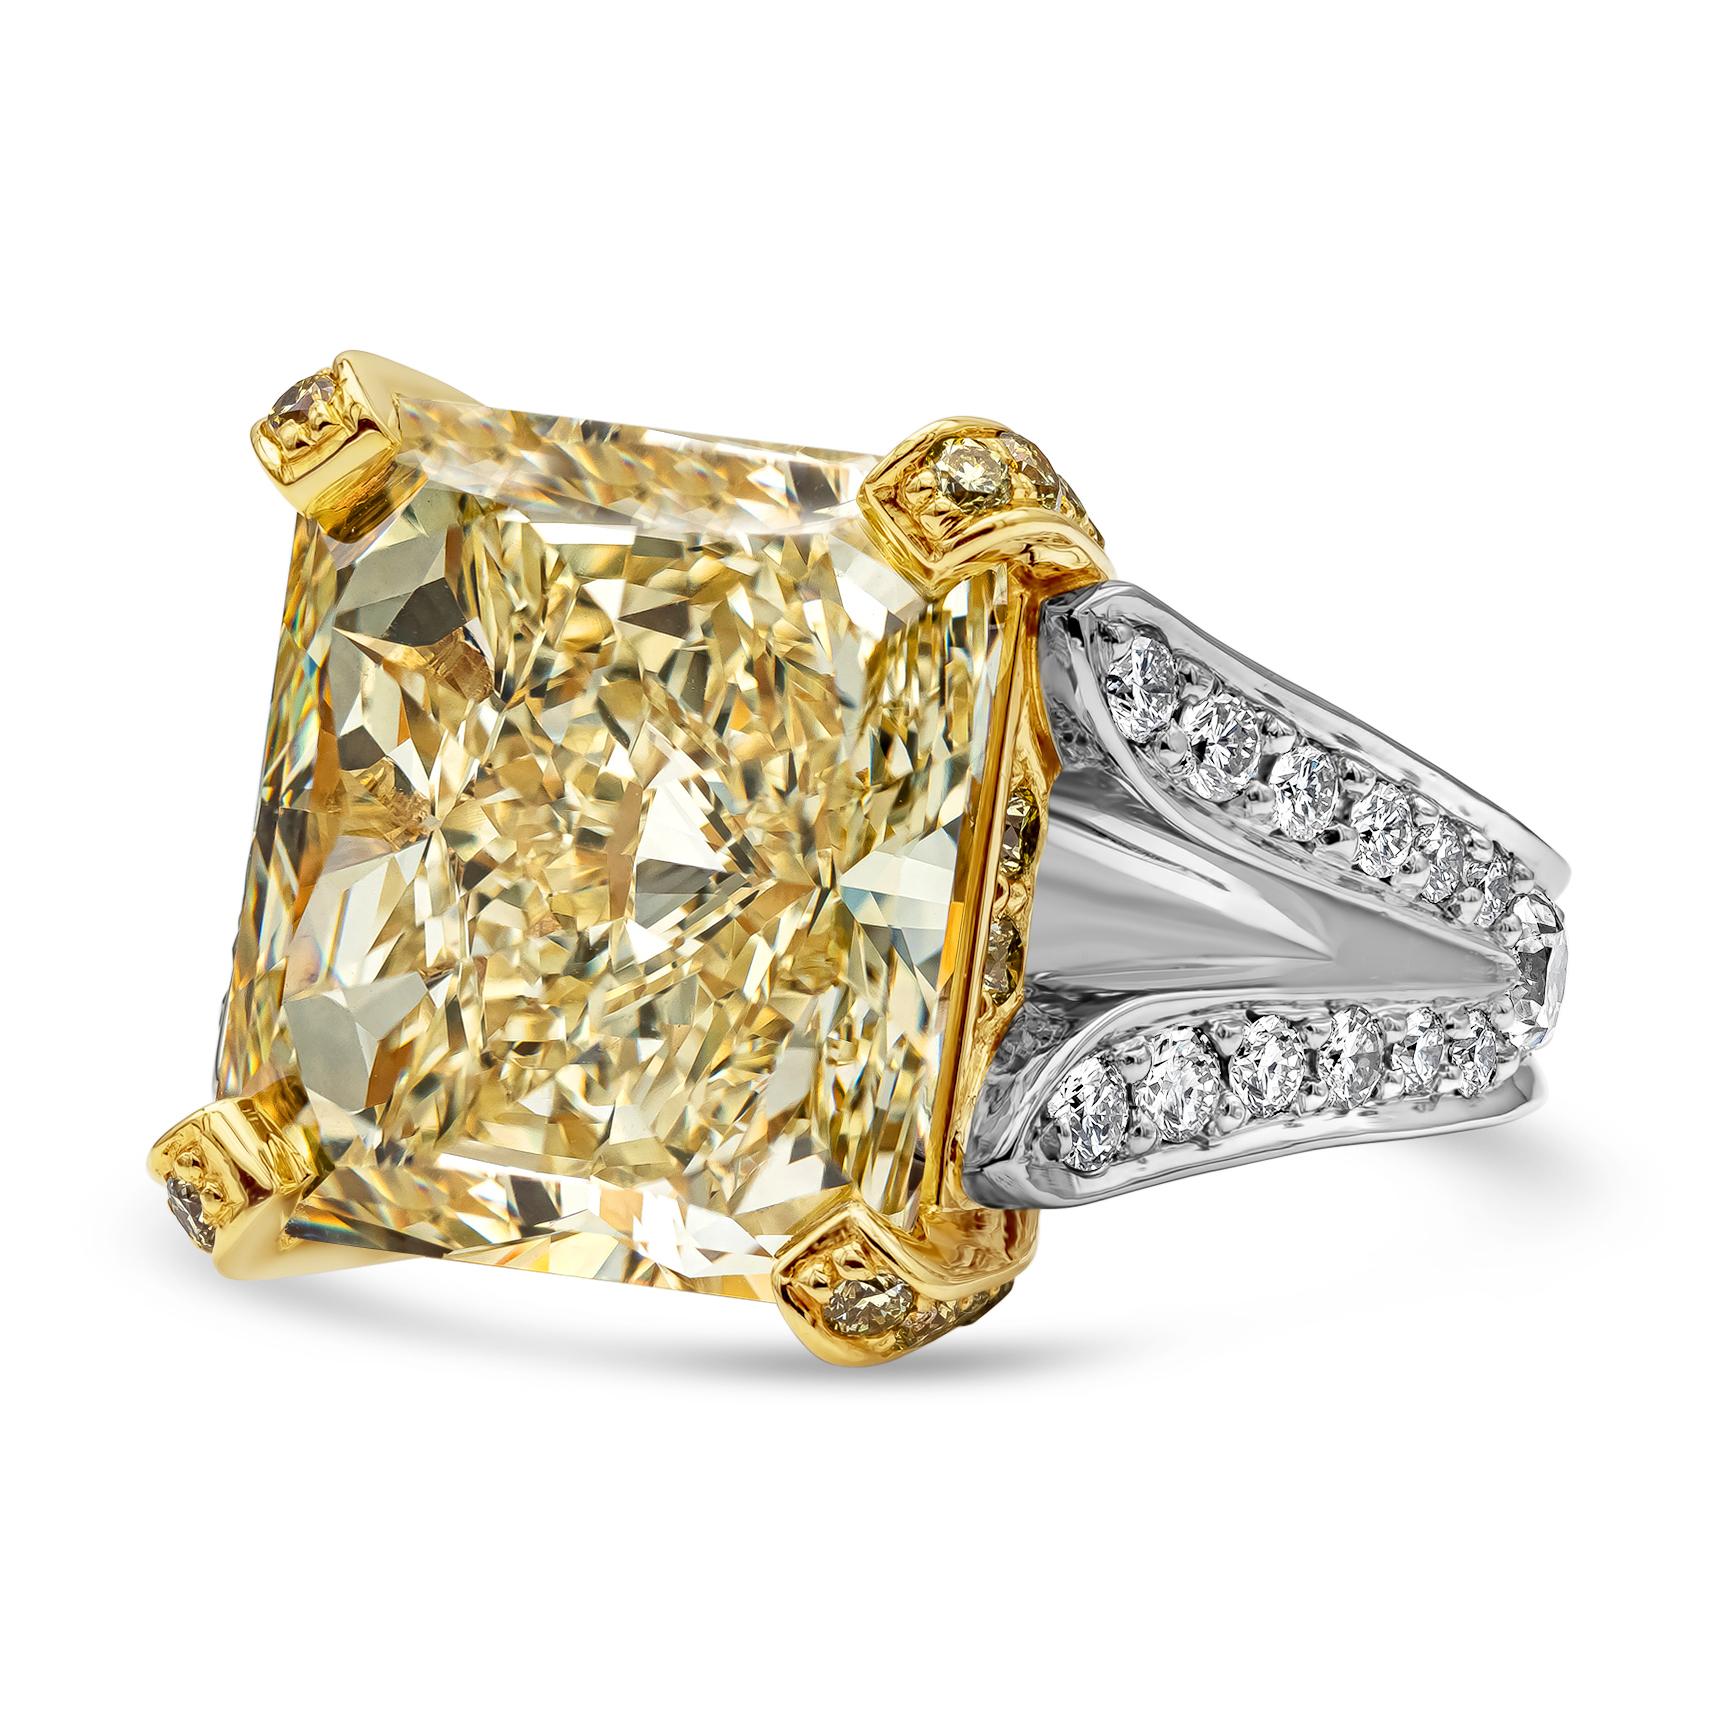 Elegant and luxurious split shank engagement ring showcasing a vibrant and color rich GIA certified 13.95 carat radiant cut fancy yellow diamond, VS1 in clarity. Center stone is set in a four prong 18k yellow gold basket encrusted with yellow